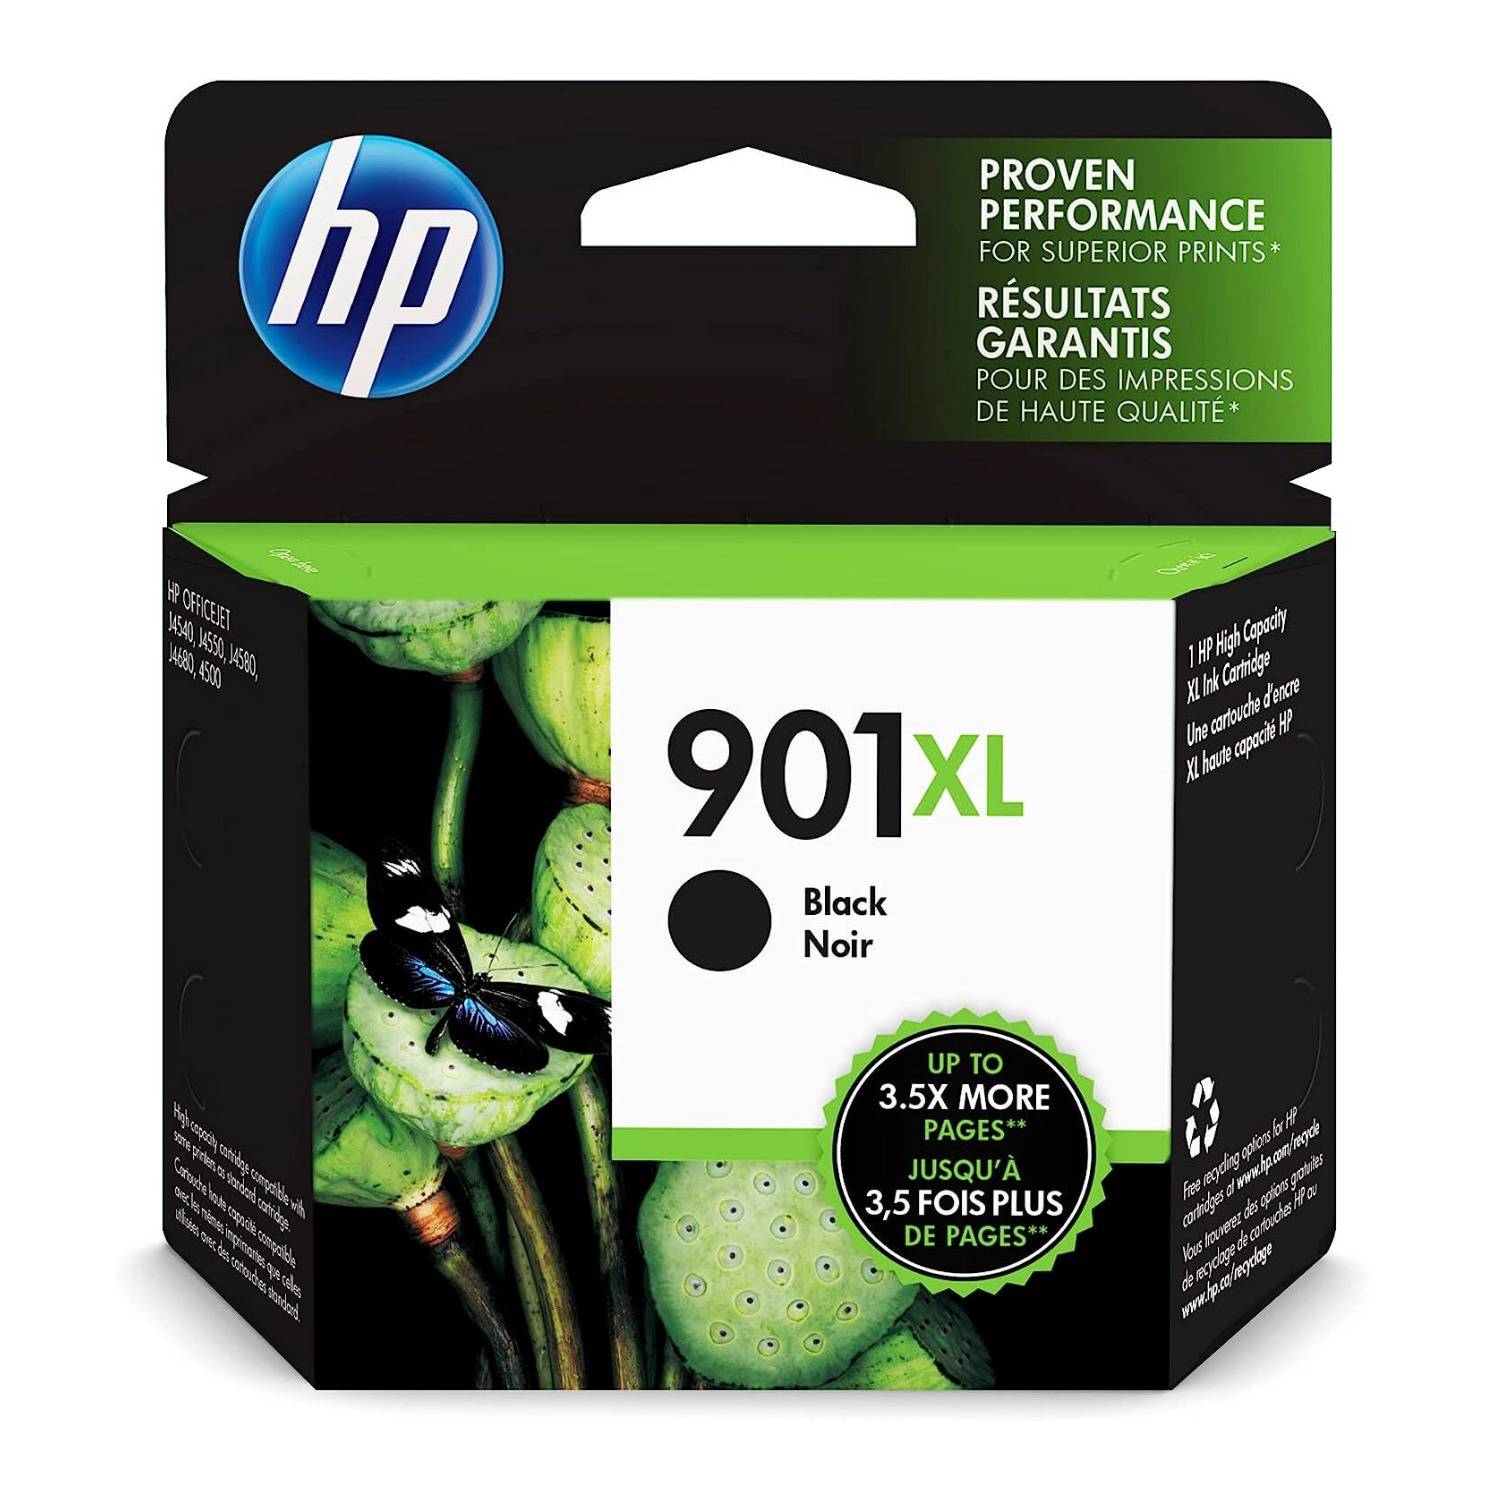 HP 901XL Black High Yield Original Ink Cartridge Compatible with HP Officejet Printer (700 Pages)